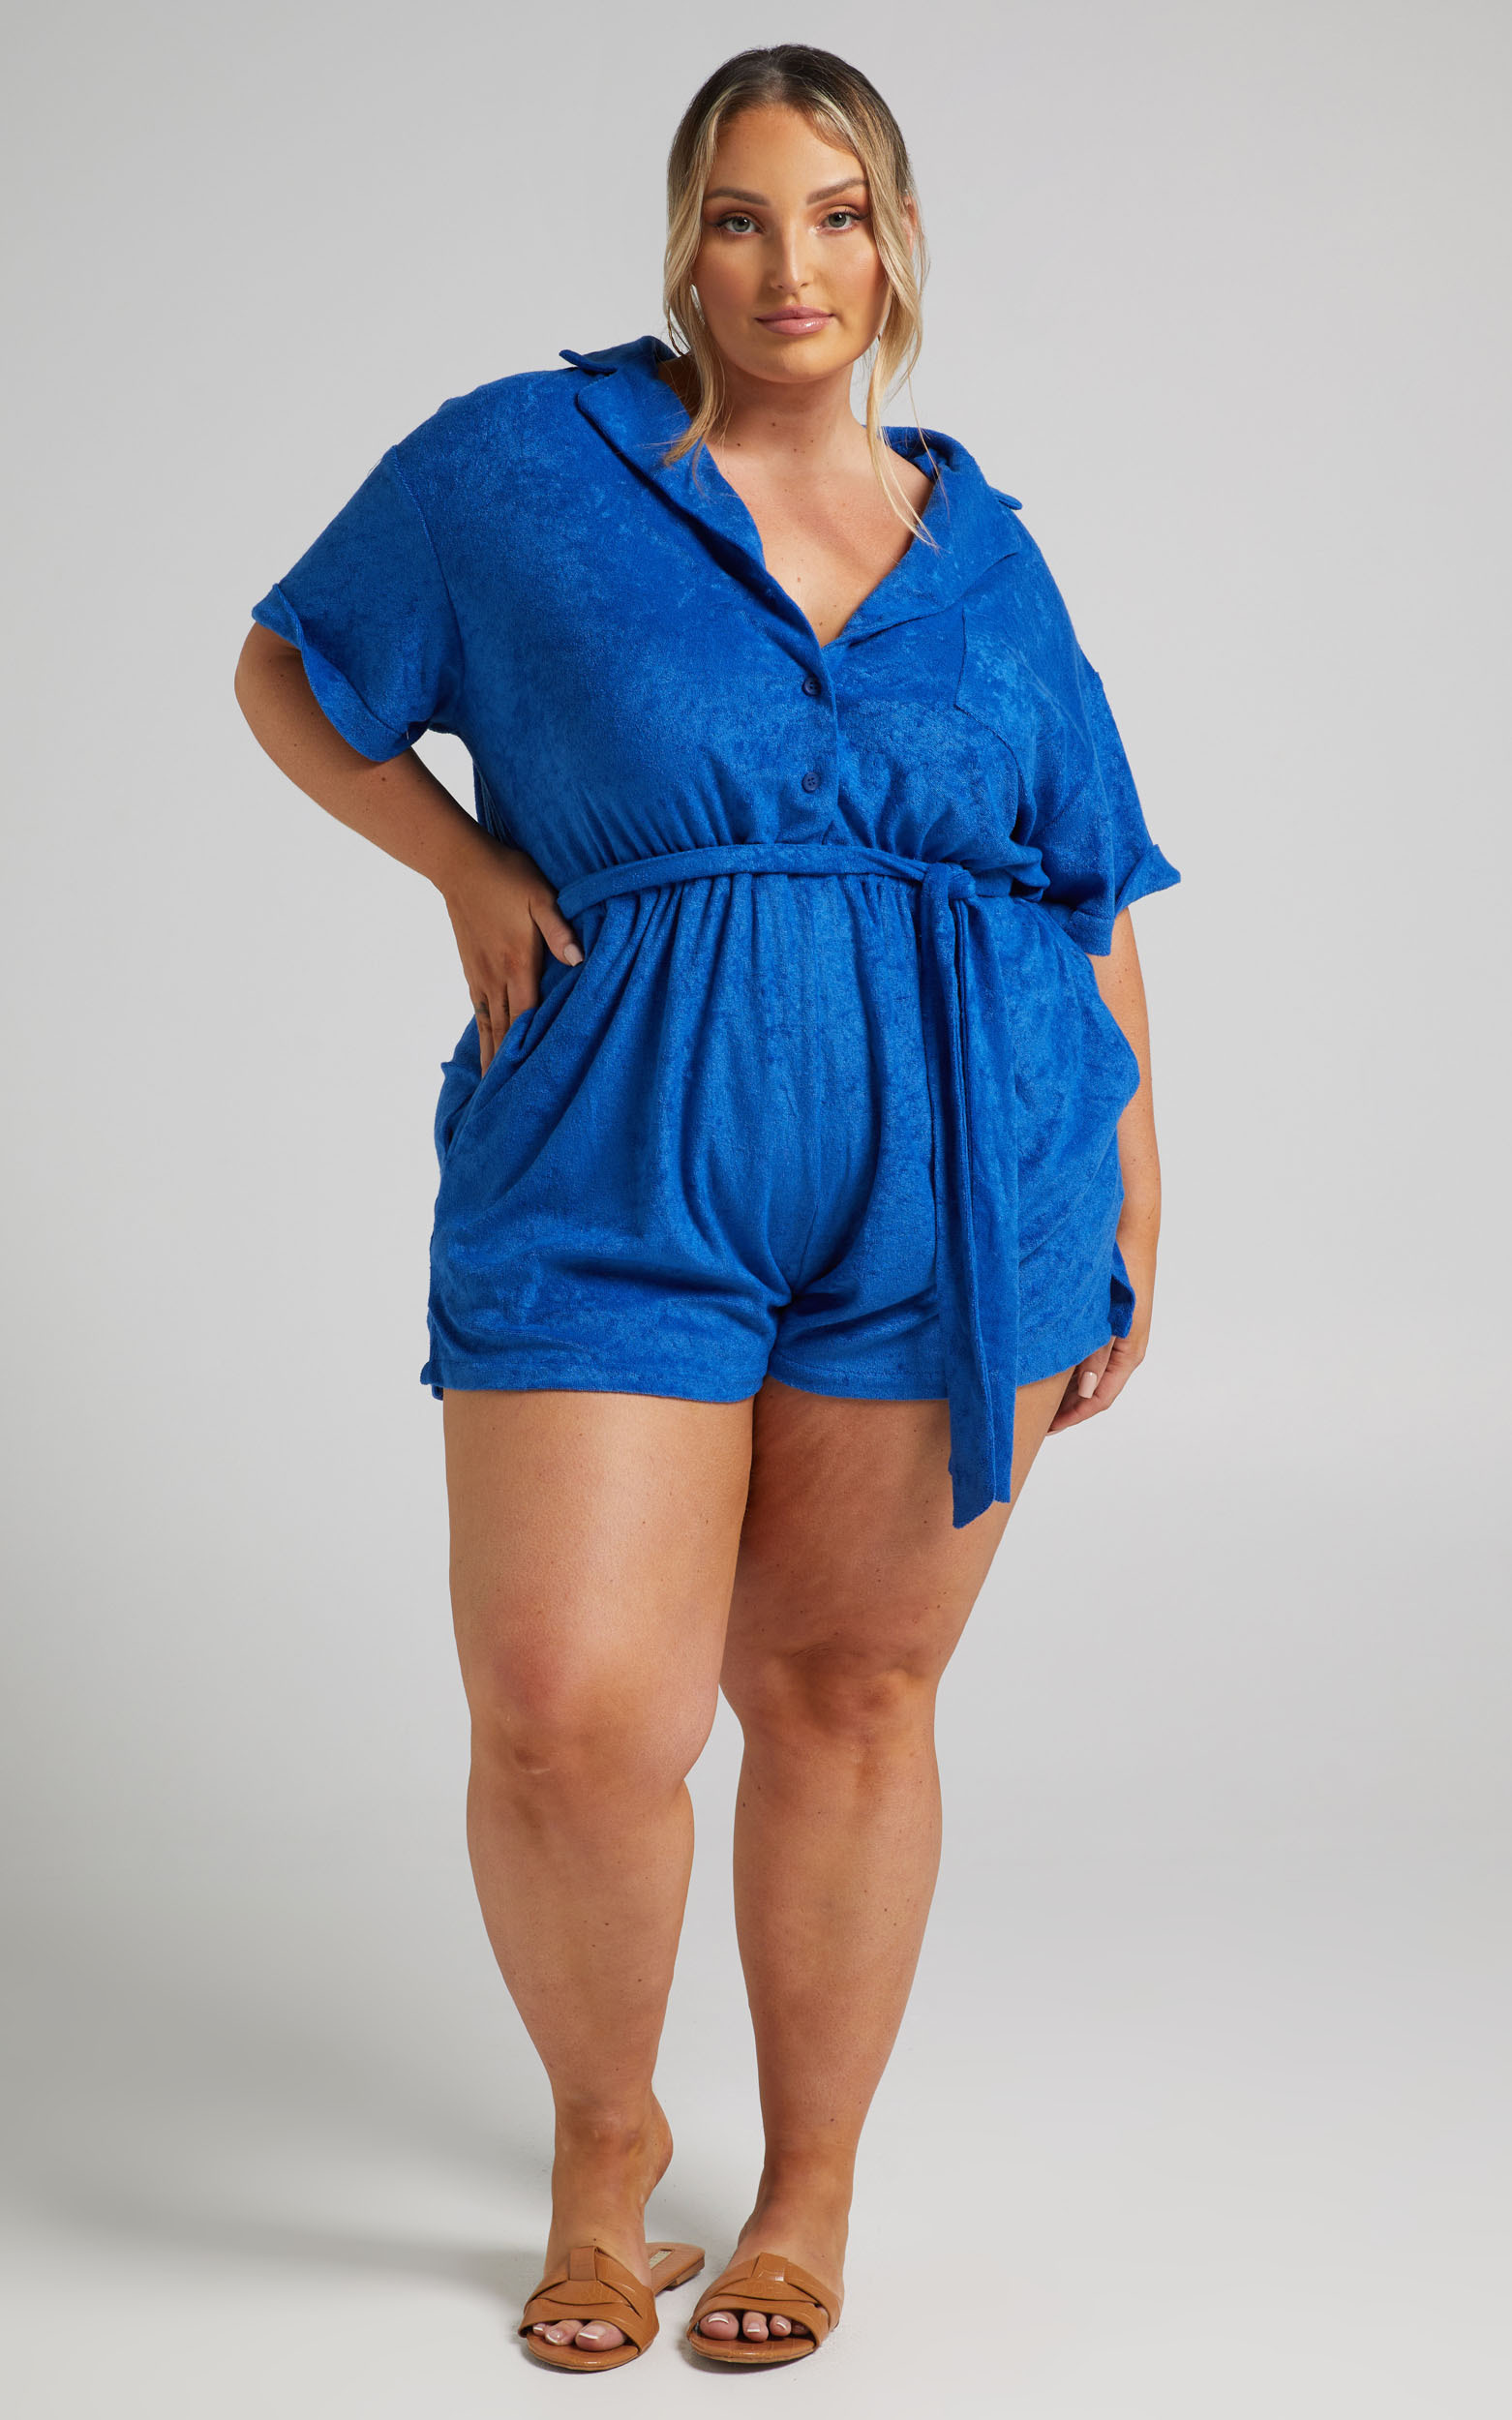 Akaithy Terry Towelling Collared Playsuit in Blue - 04, BLU1, hi-res image number null